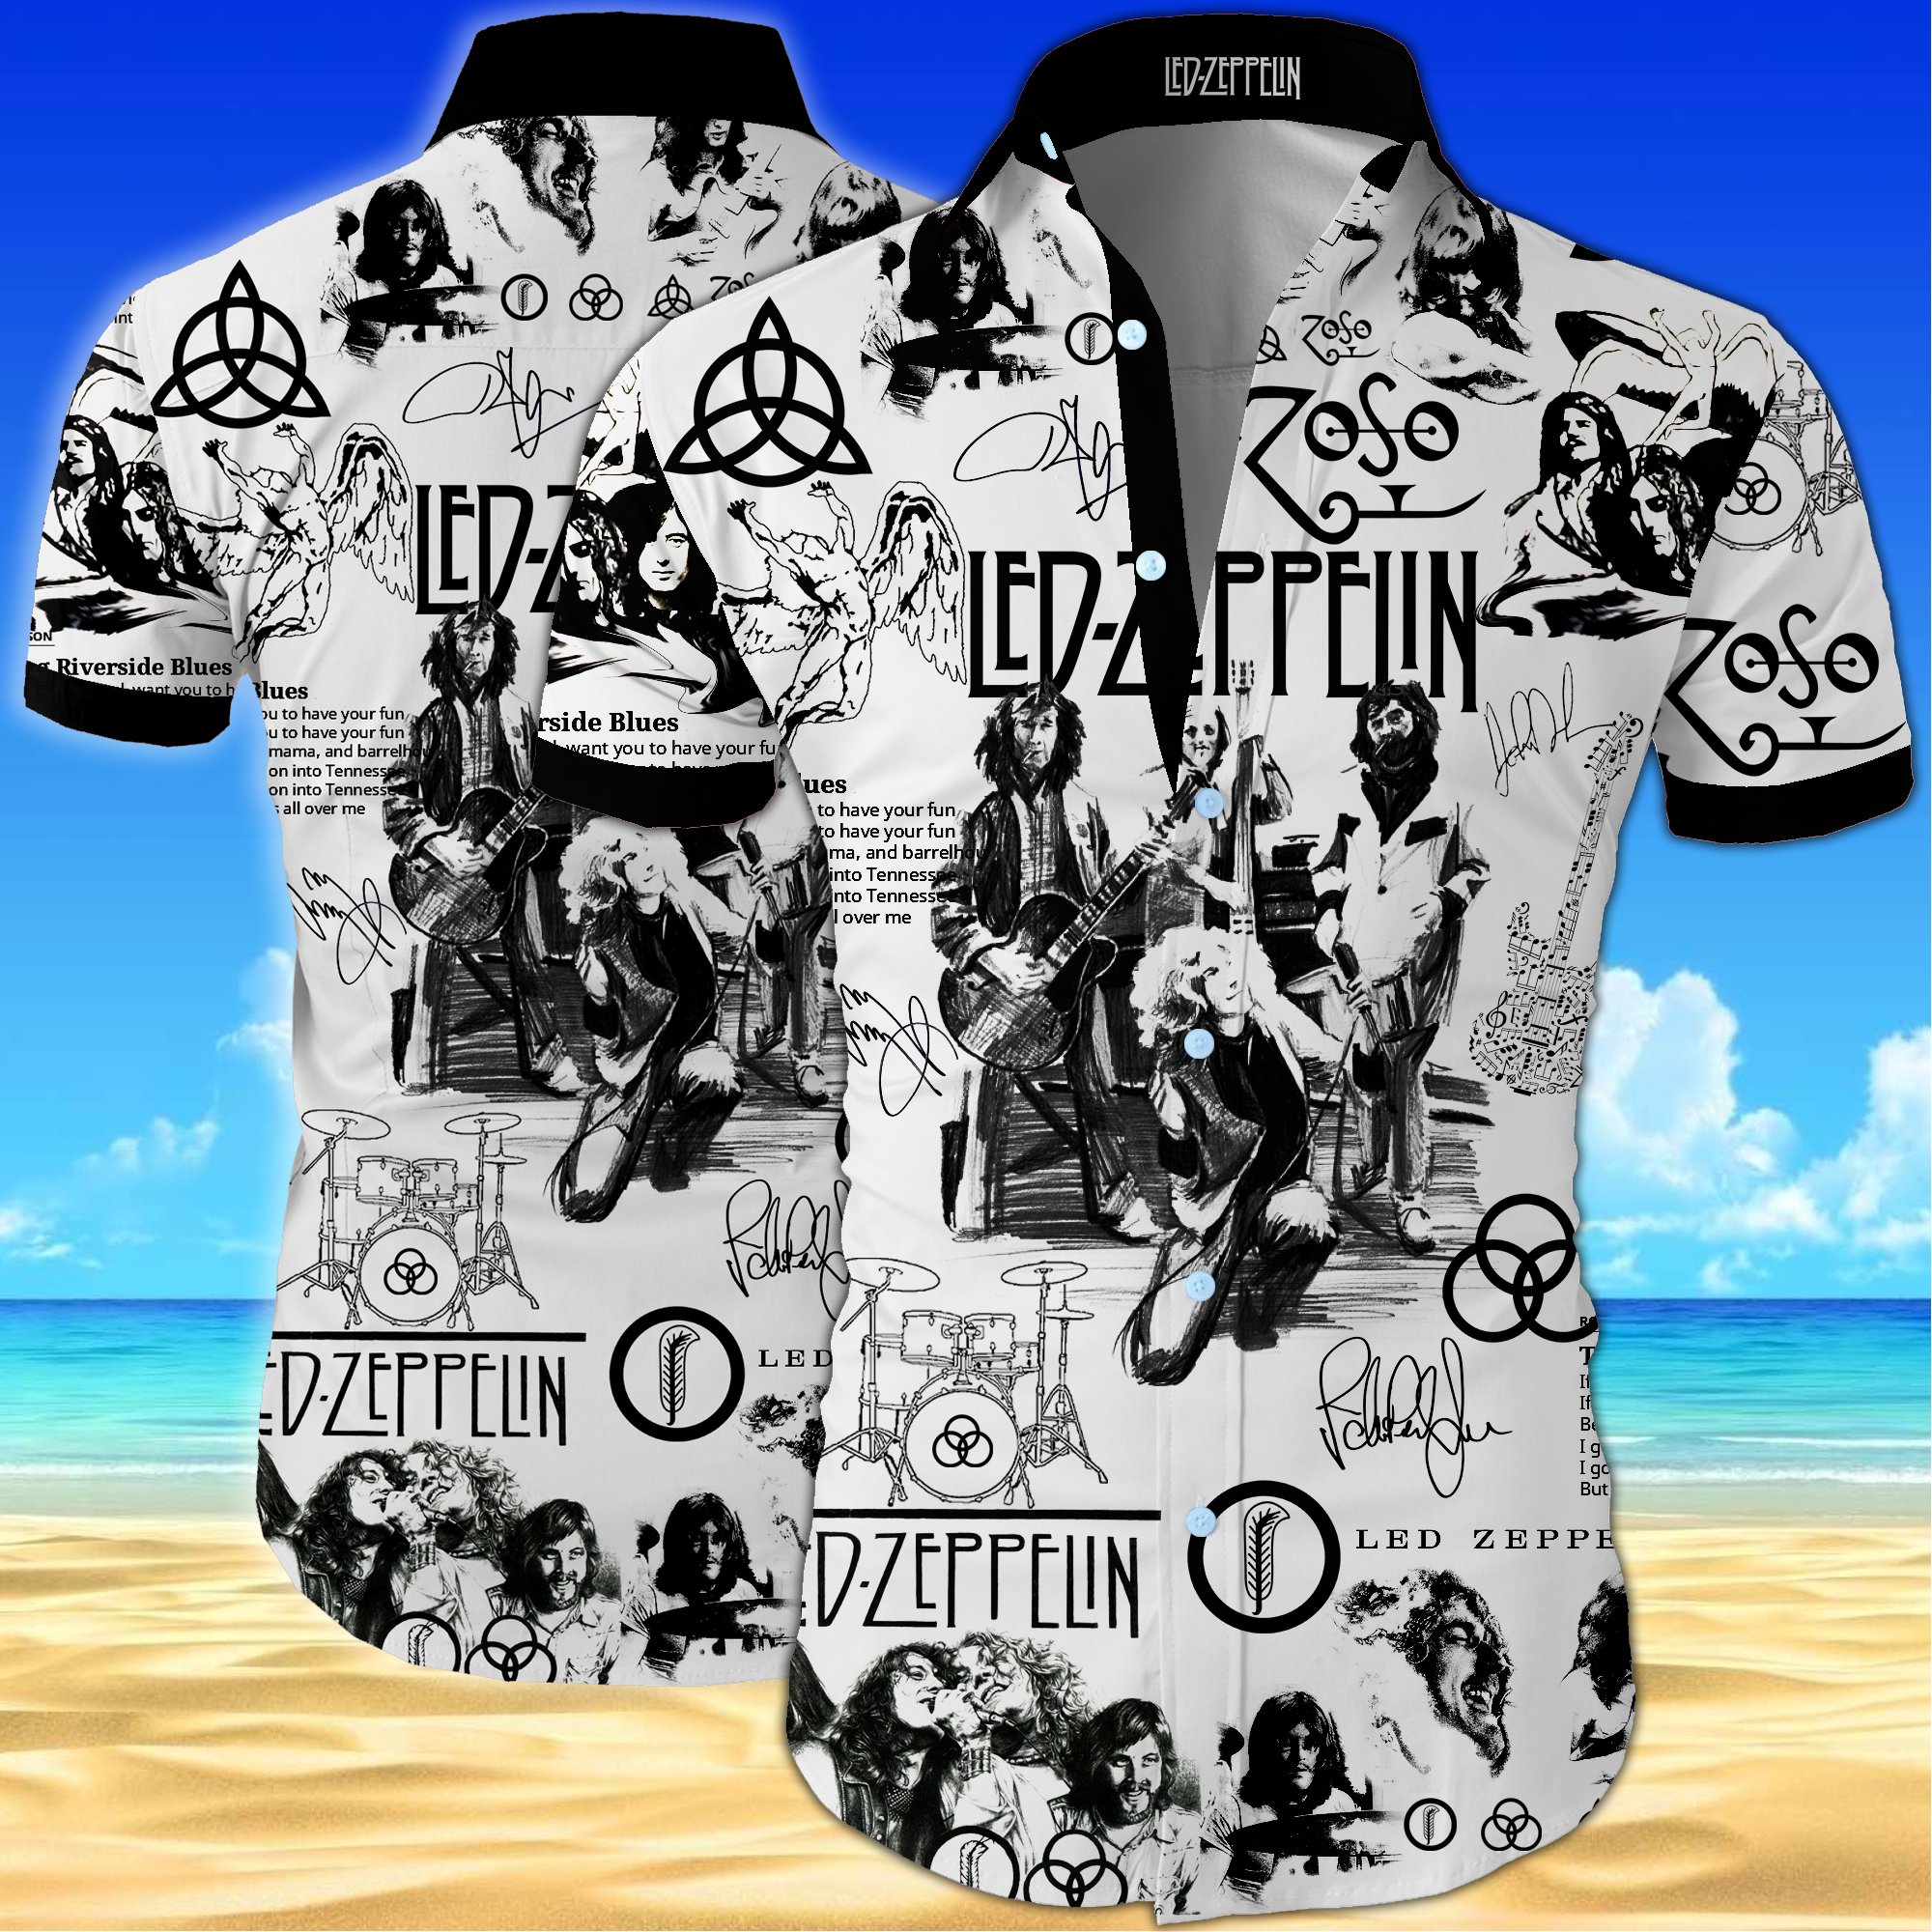 A Musical Journey: Led Zeppelin's Iconic Performance at the O2 and the Led Zeppelin Hawaiian Shirt